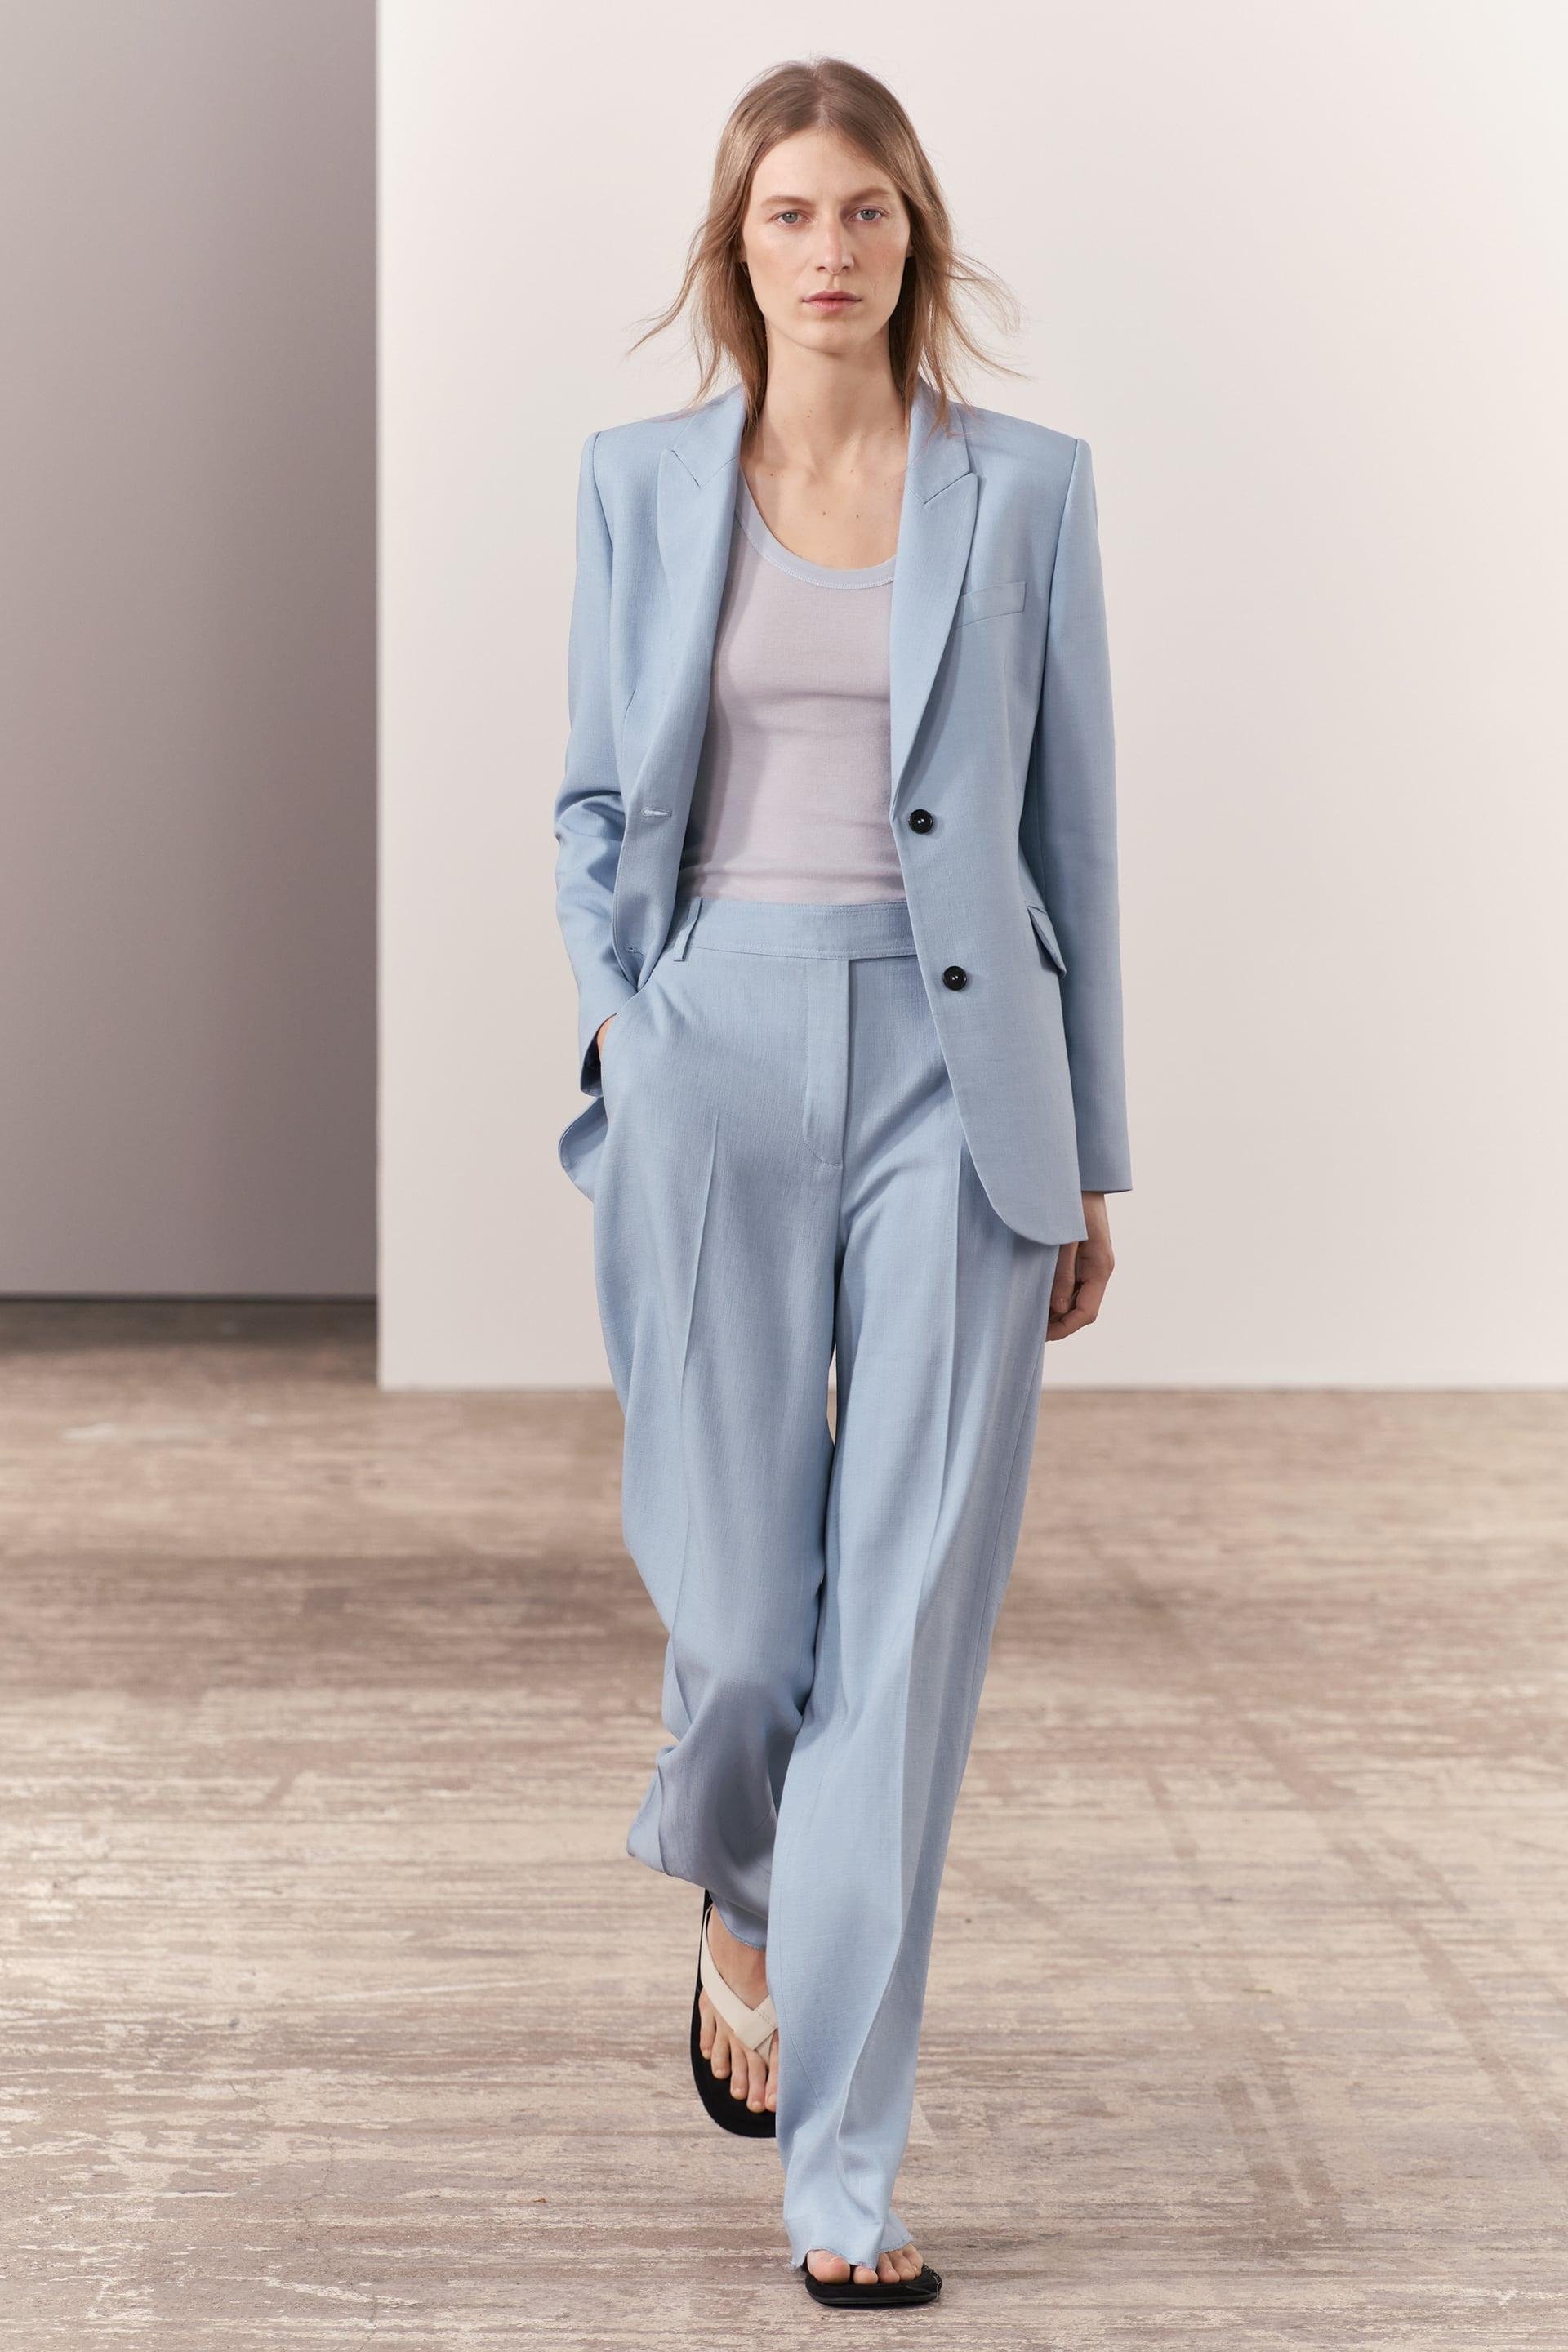 ZW COLLECTION STRAIGHT CUT SUIT PANTS by ZARA